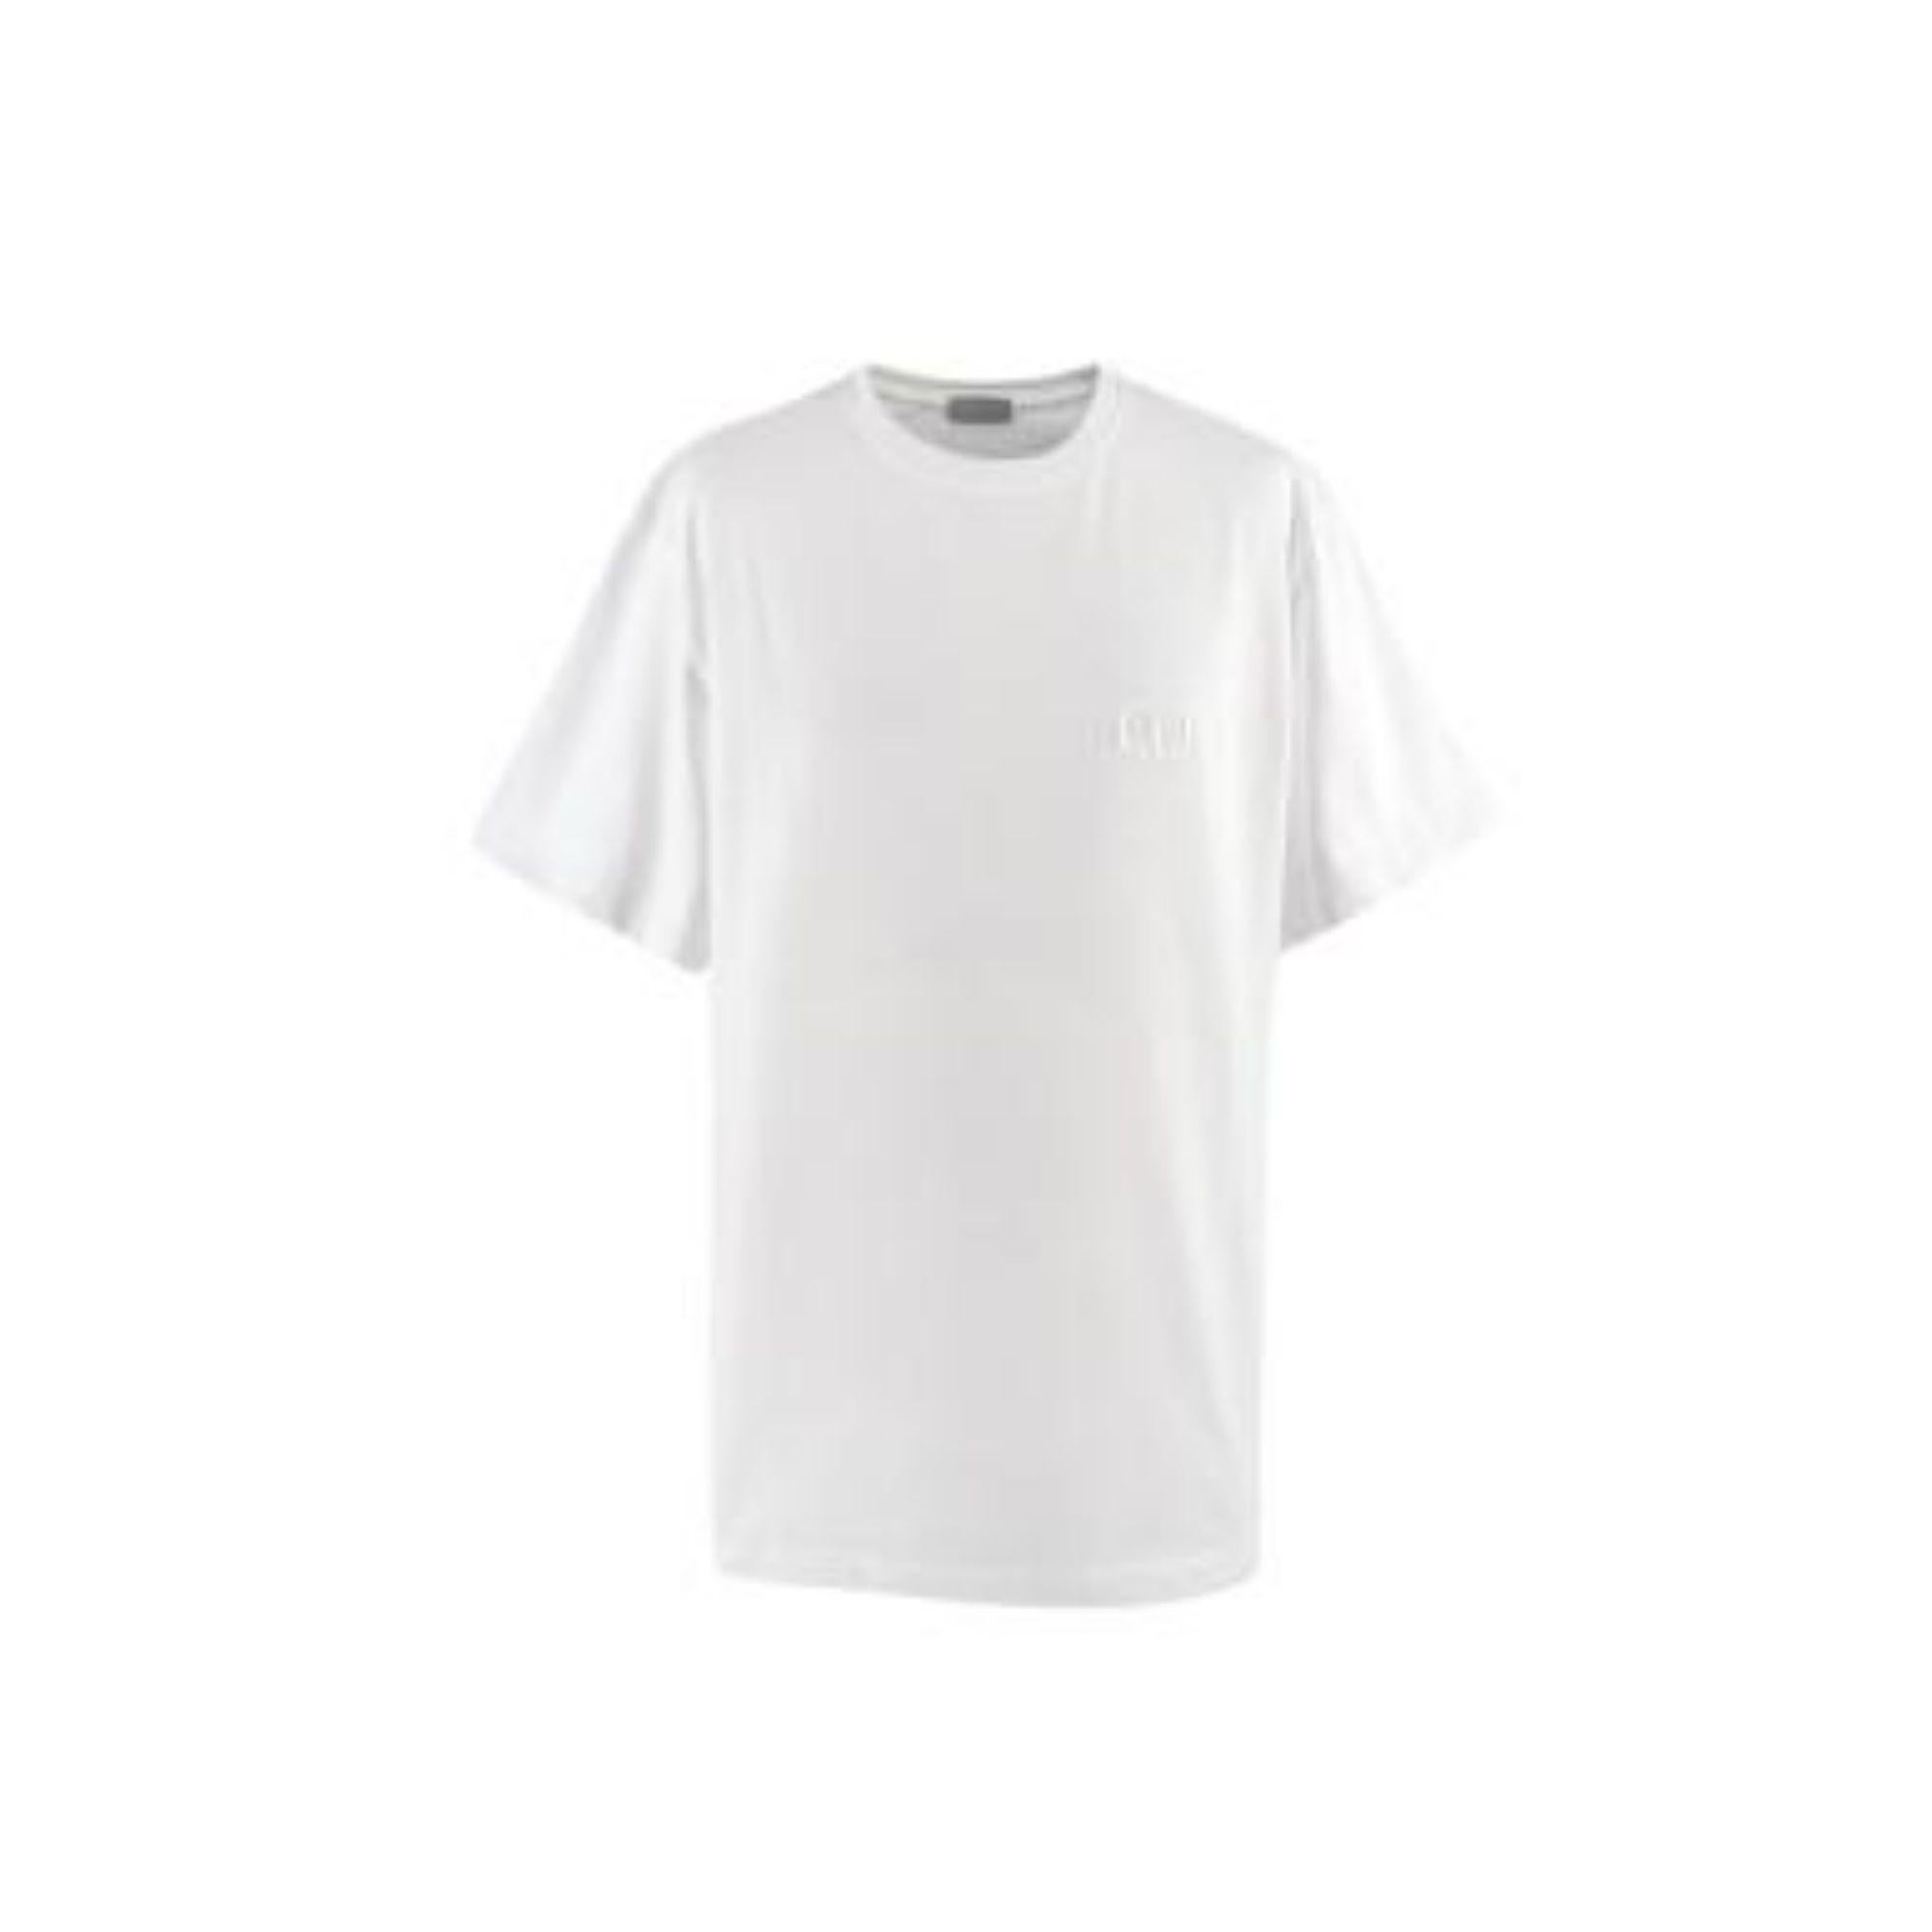 Dior Homme White CD Embroidered Cotton T-shirt

- Crew neck
- 'CD' logo embroidery on the chest
- Thicker fabric construction

Material
100% Cotton

Made in Italy

PLEASE NOTE, THESE ITEMS ARE PRE-OWNED AND MAY SHOW SIGNS OF BEING STORED EVEN WHEN